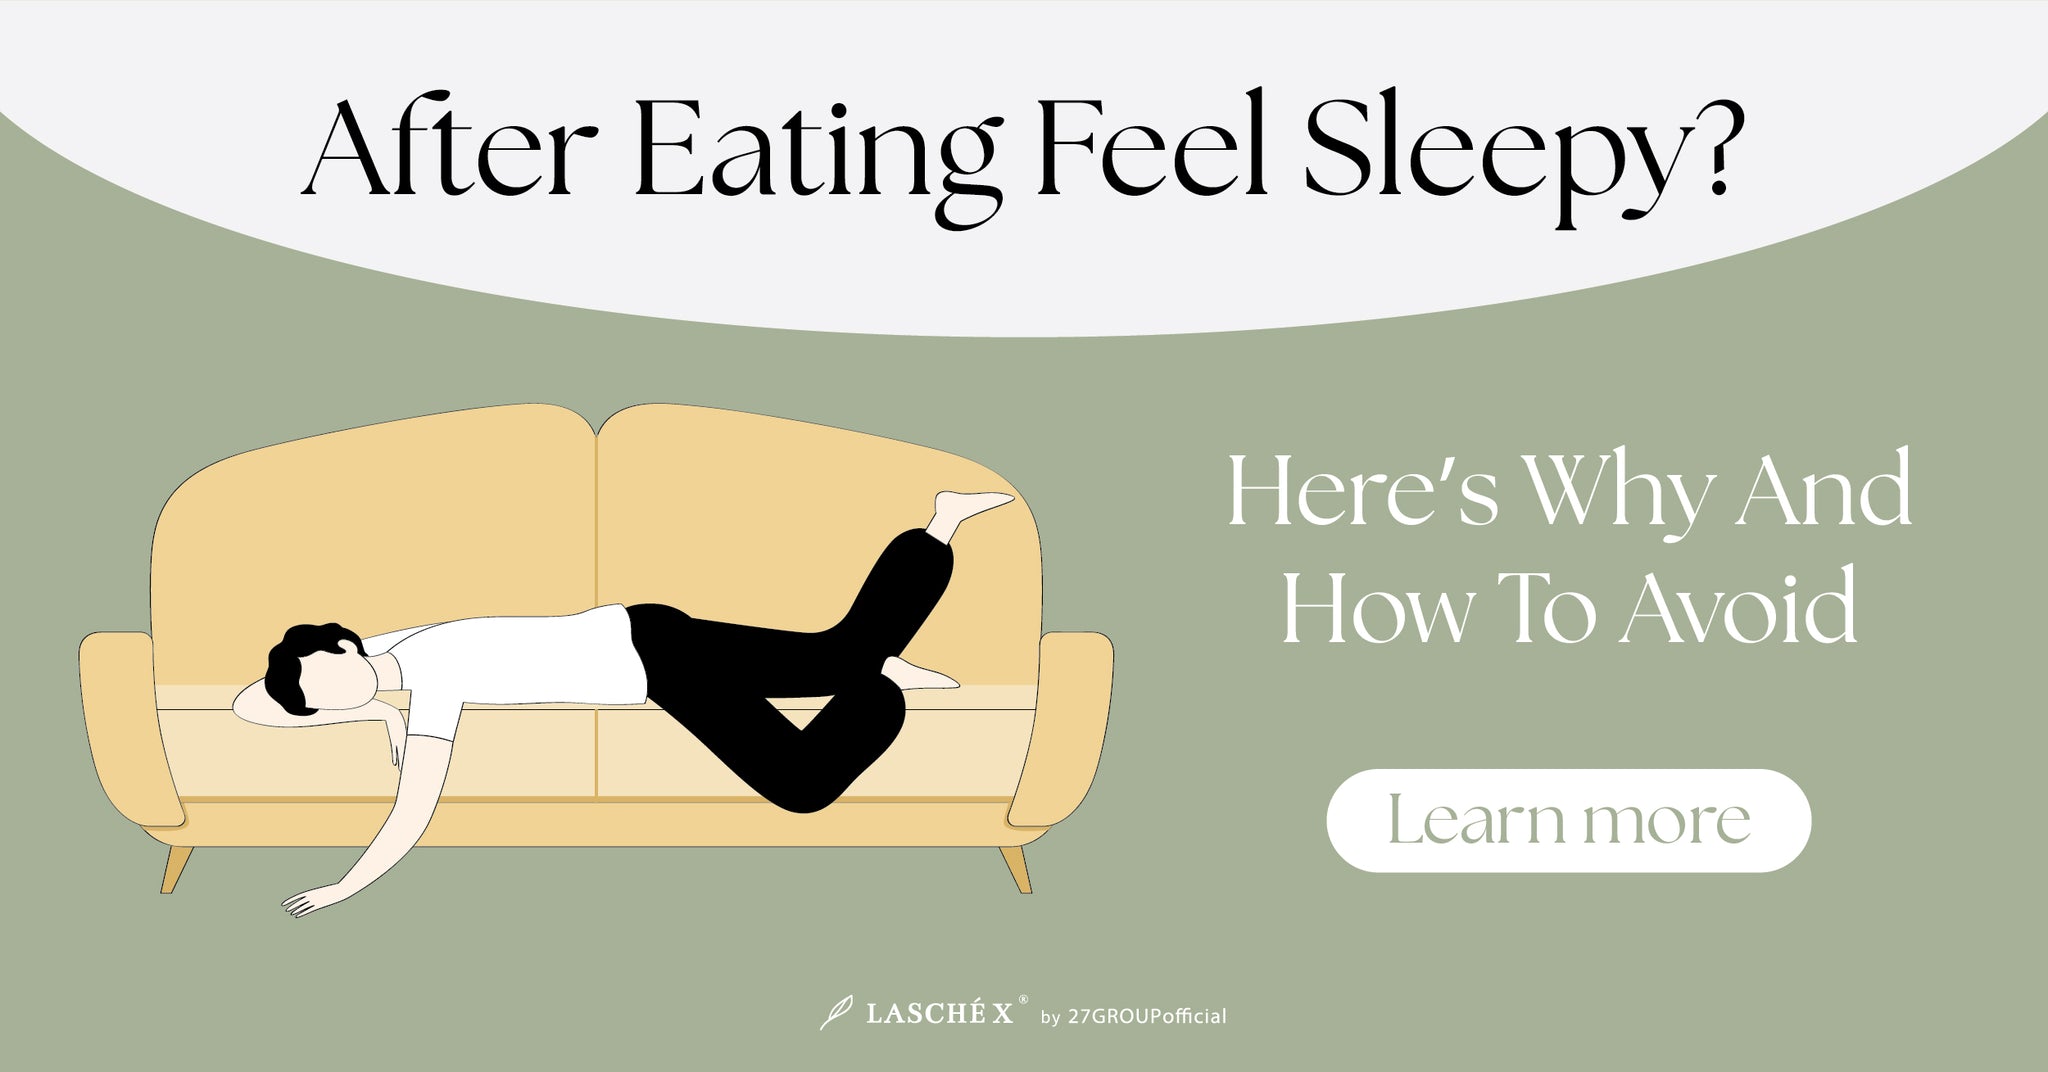 Reason why after eating feel sleepy and how to avoid